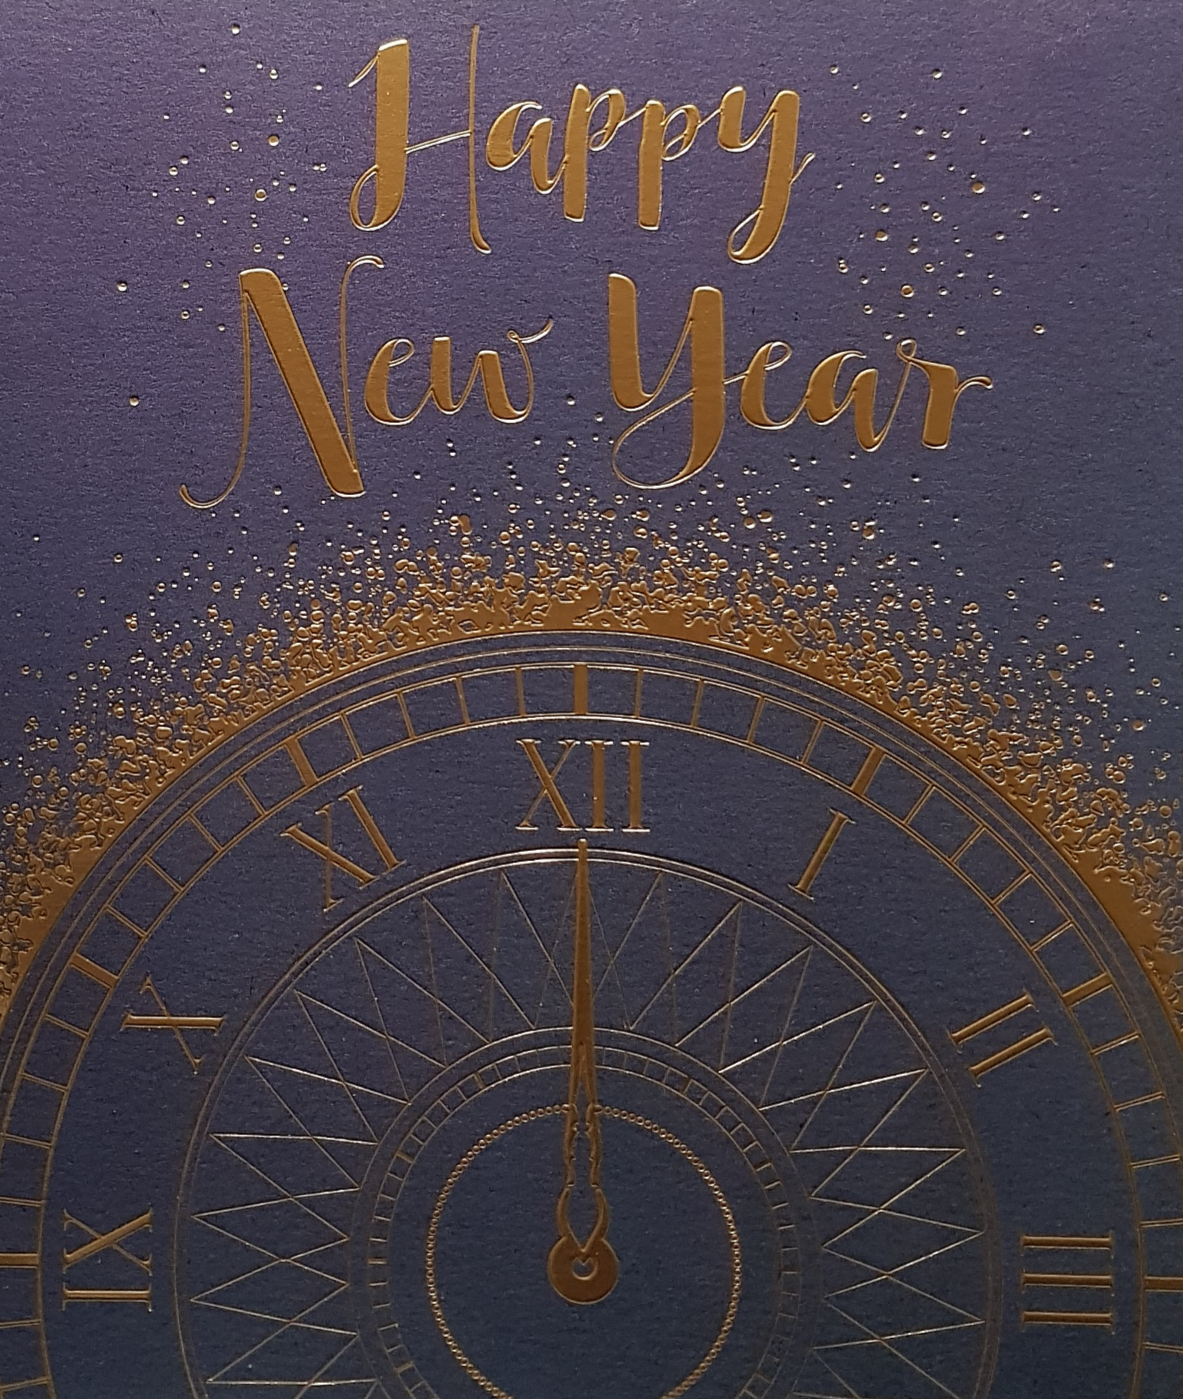 New Year Card - Gold Font & Big Clock on Purple Background